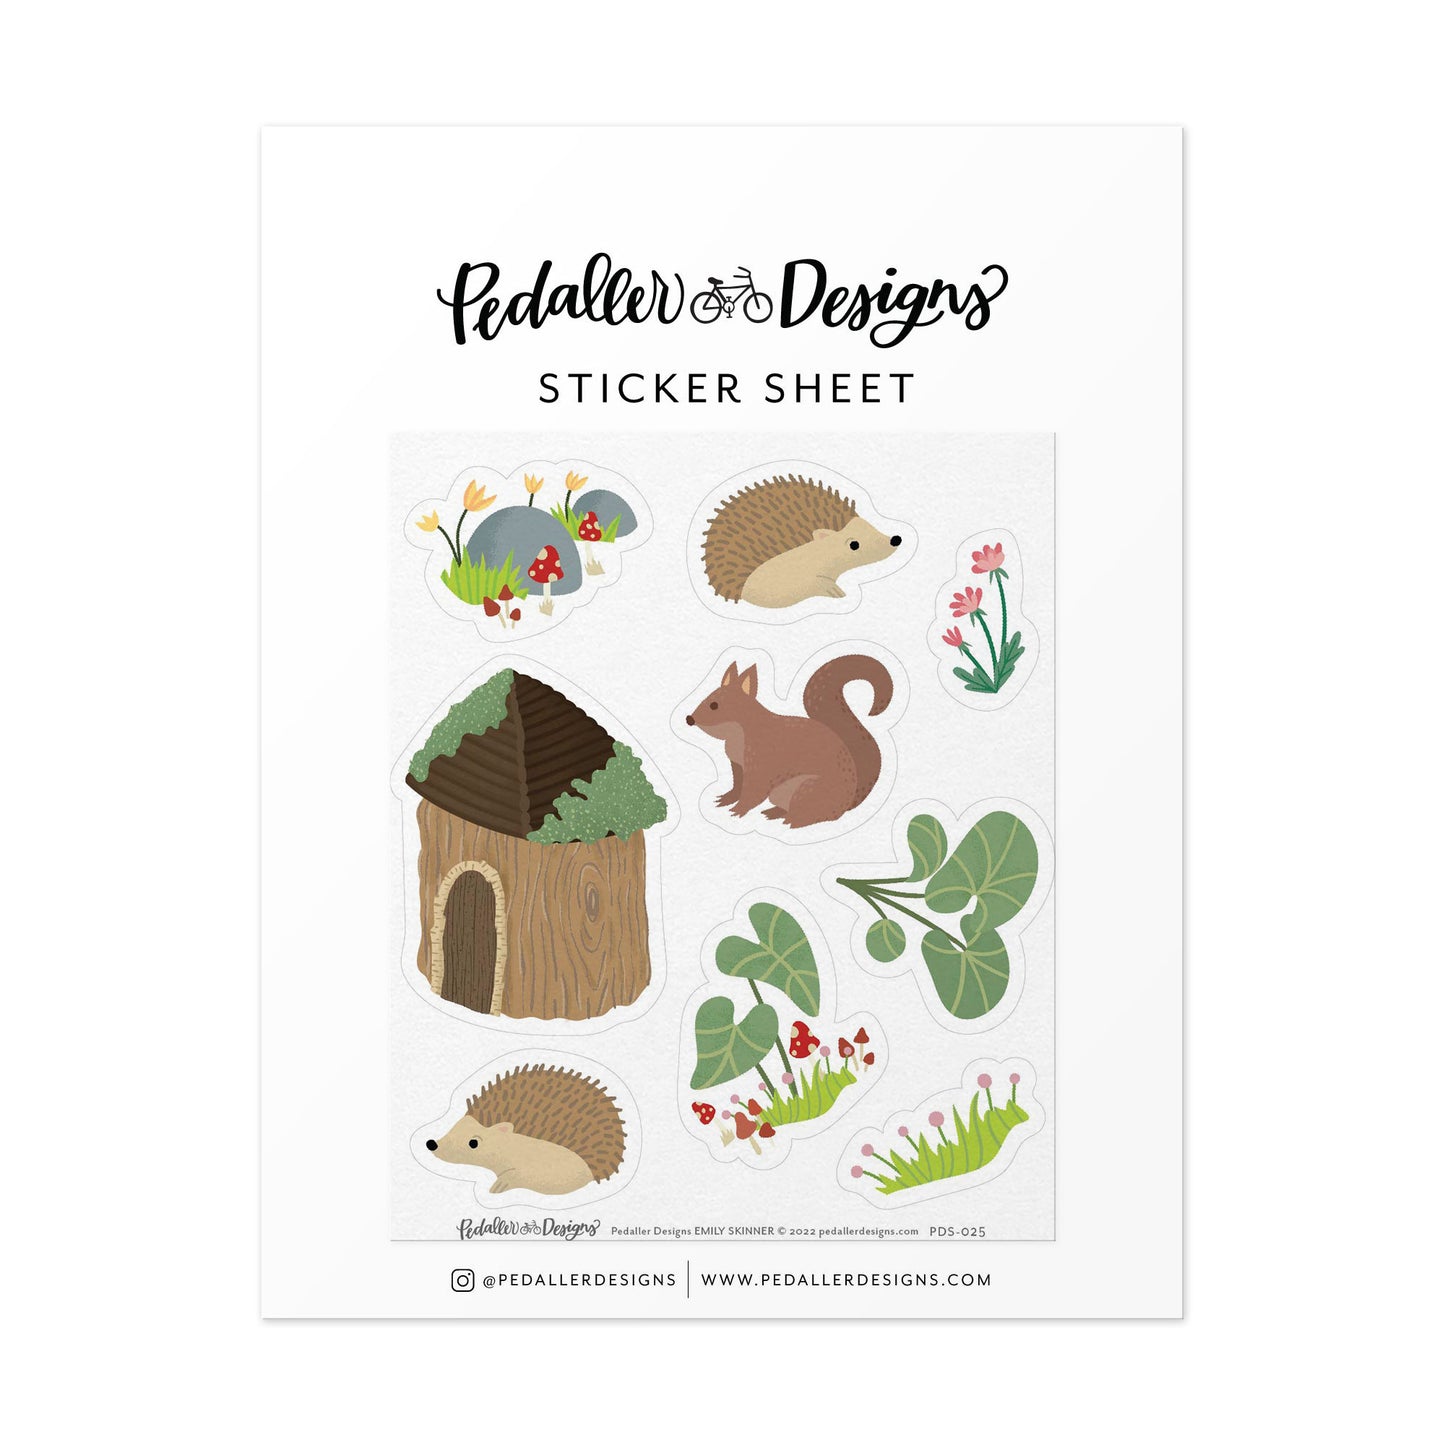 woodland themed sticker sheet with 9 stickers sized 1.5 inches to 0.5 inches featuring hedgehogs, squirrels, flowers, mushrooms and a fairy house.